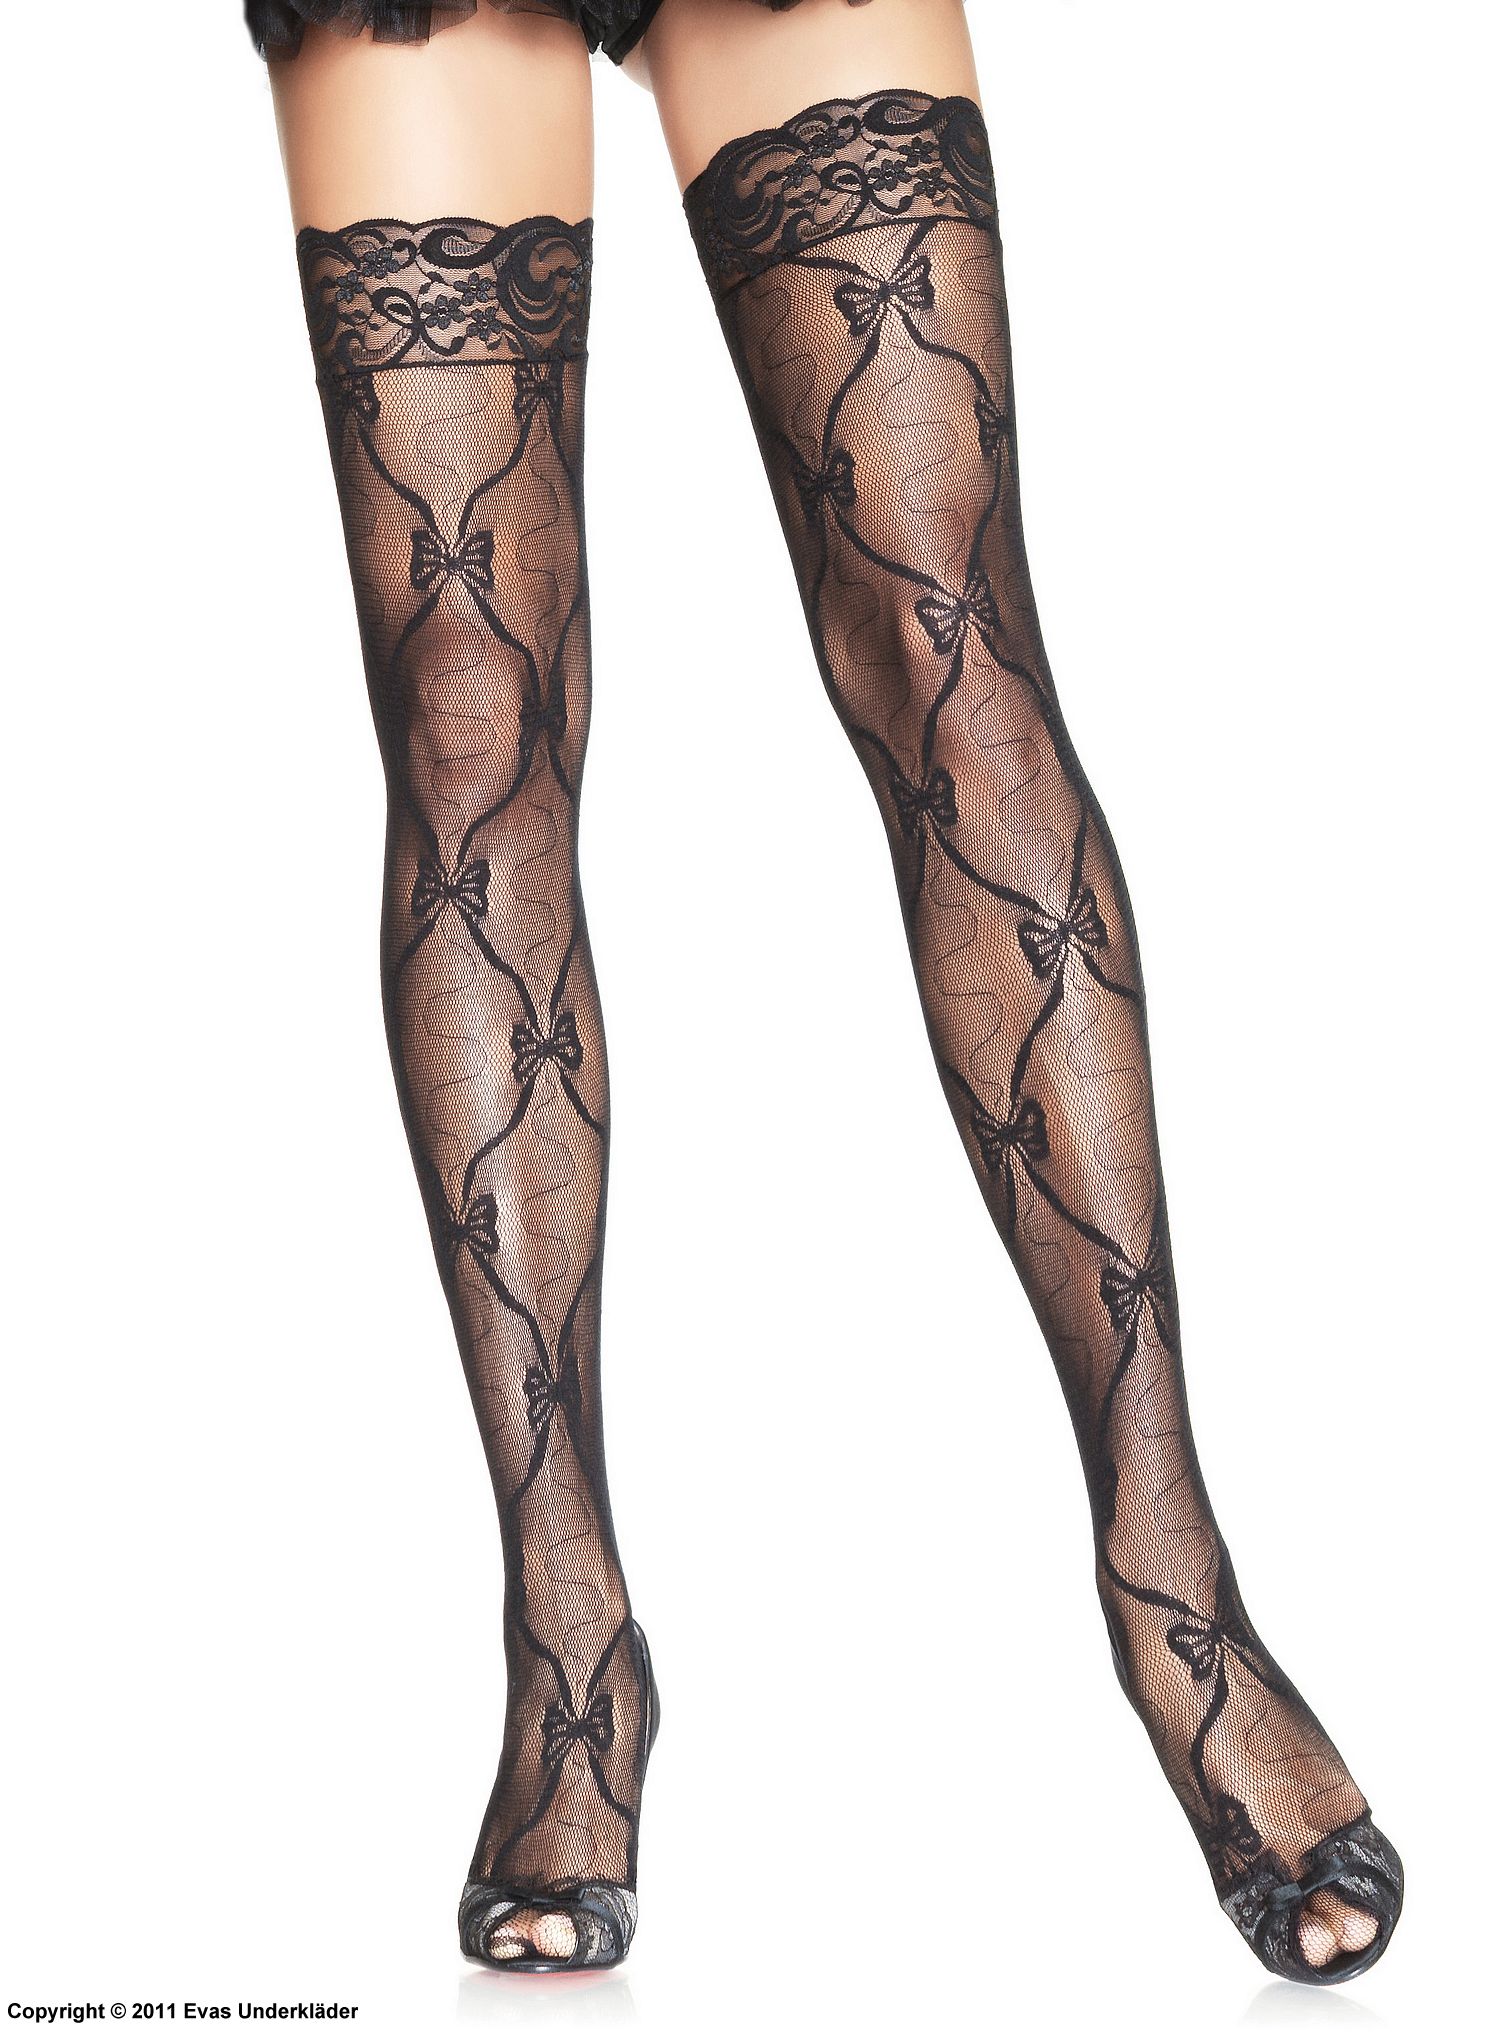 Thigh high stockings with woven ribbon patterns, plus size